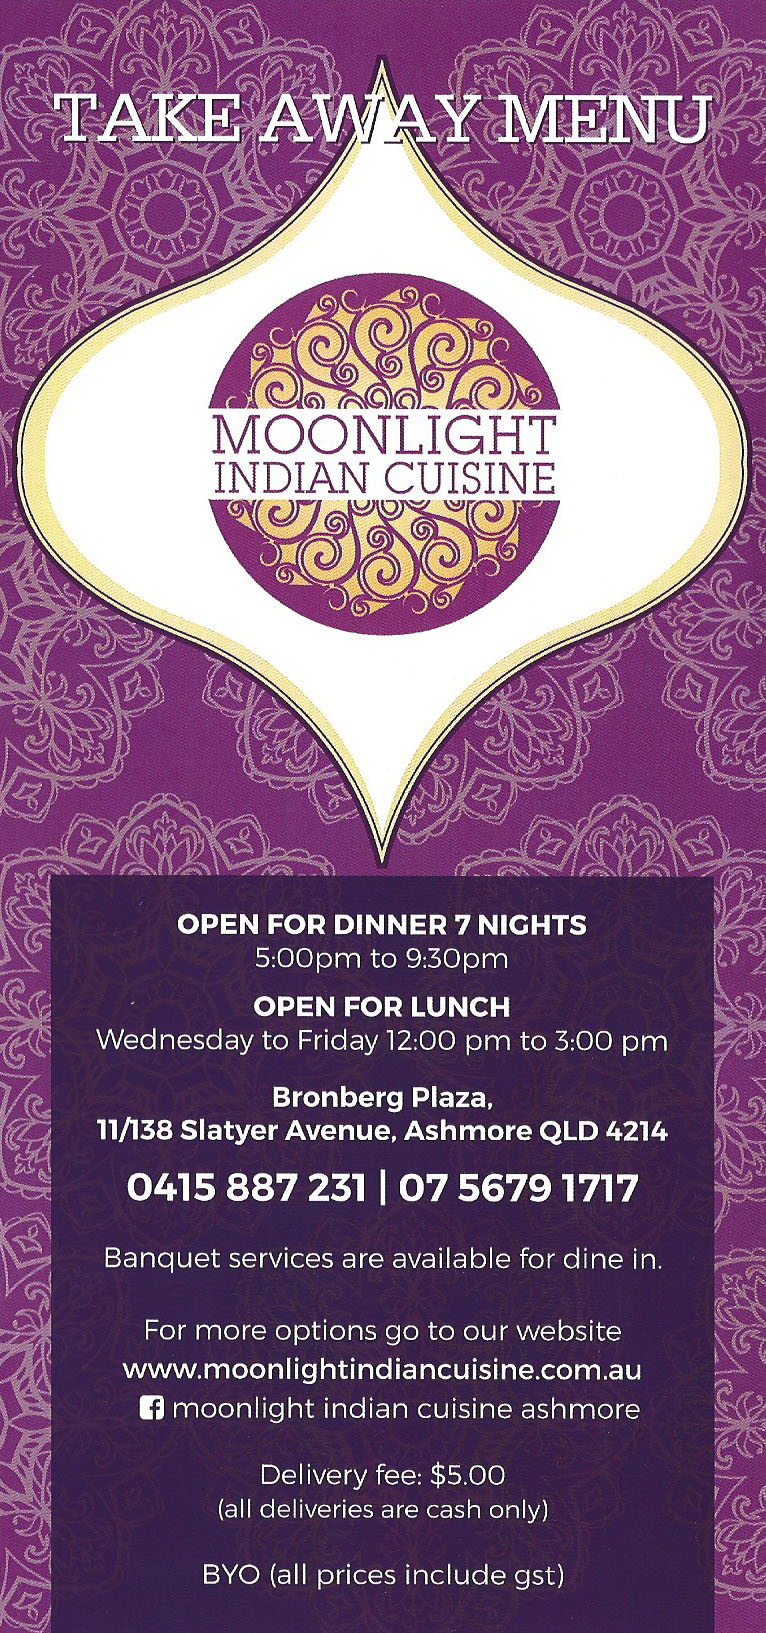 Moonlight Indian Cuisine Ashmore Gold Coast - QLD | OBZ Online Business Zone